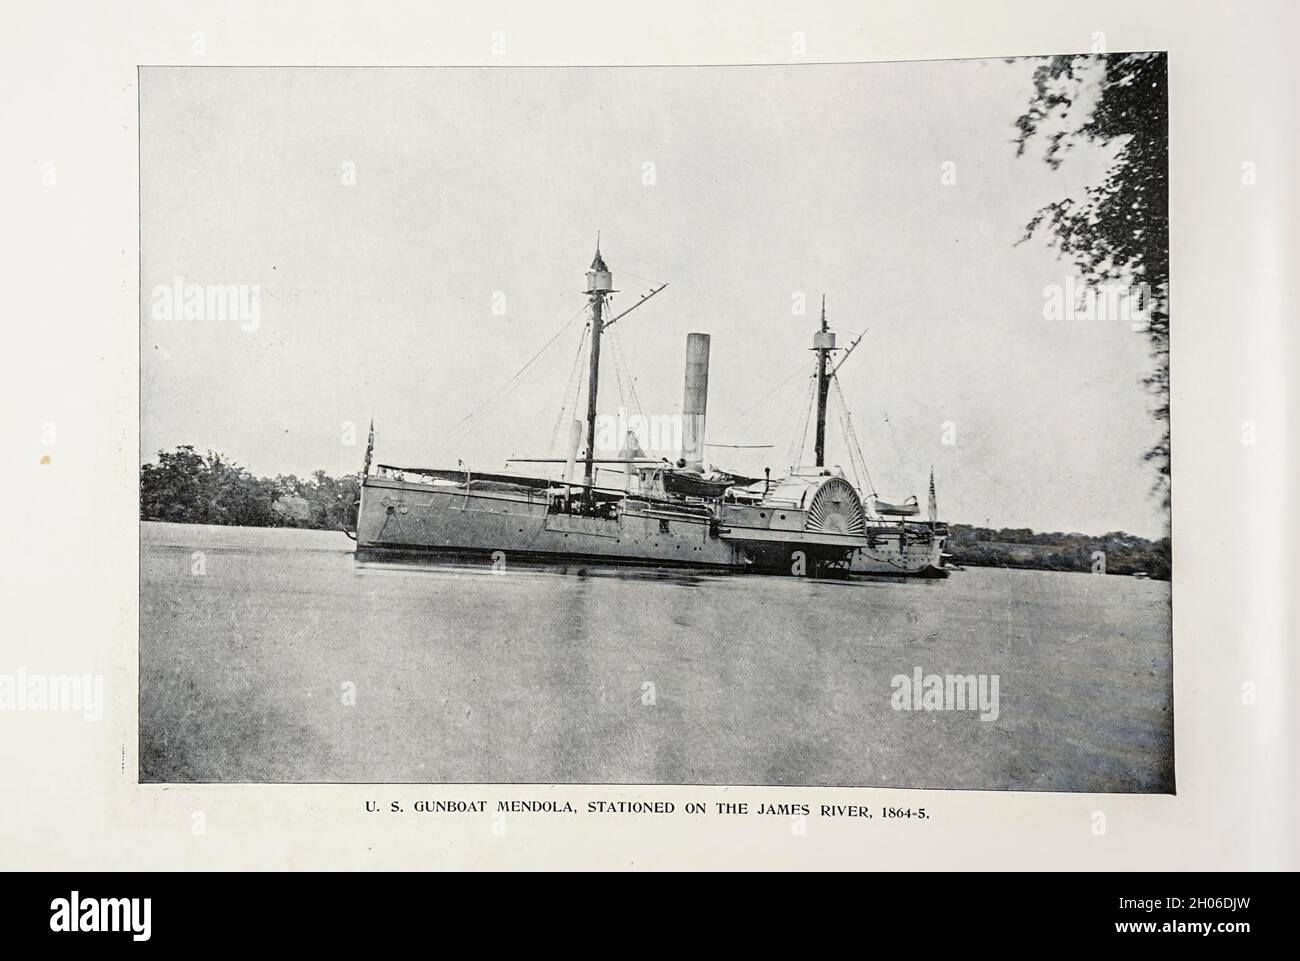 U.S. GUNBOAT MENDOLA STATIONED ON THE JAMES RIVER, 1864-5 from The American Civil War book and Grant album : 'art immortelles' : a portfolio of half-tone reproductions from rare and costly photographs designed to perpetuate the memory of General Ulysses S. Grant, depicting scenes and incidents in connection with the Civil War Published  in Boston and New York by W. H. Allen in 1894 Stock Photo